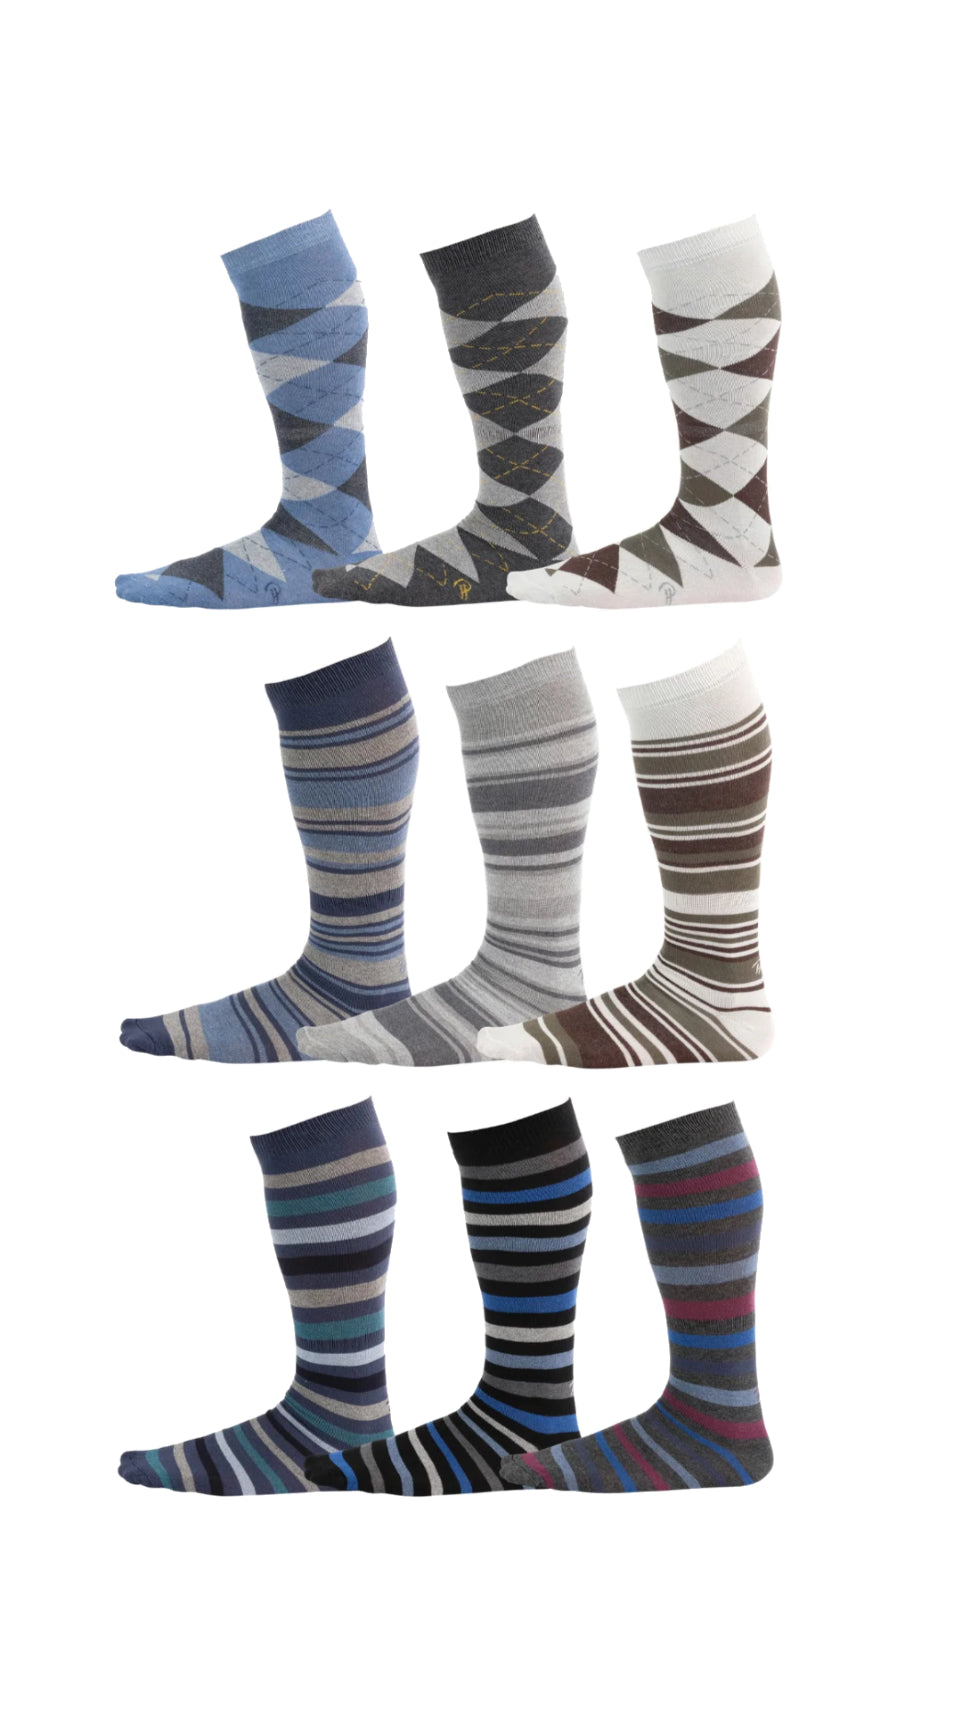 argyle and striped over the calf dress socks in brown, blue, light grey, white, and black colors